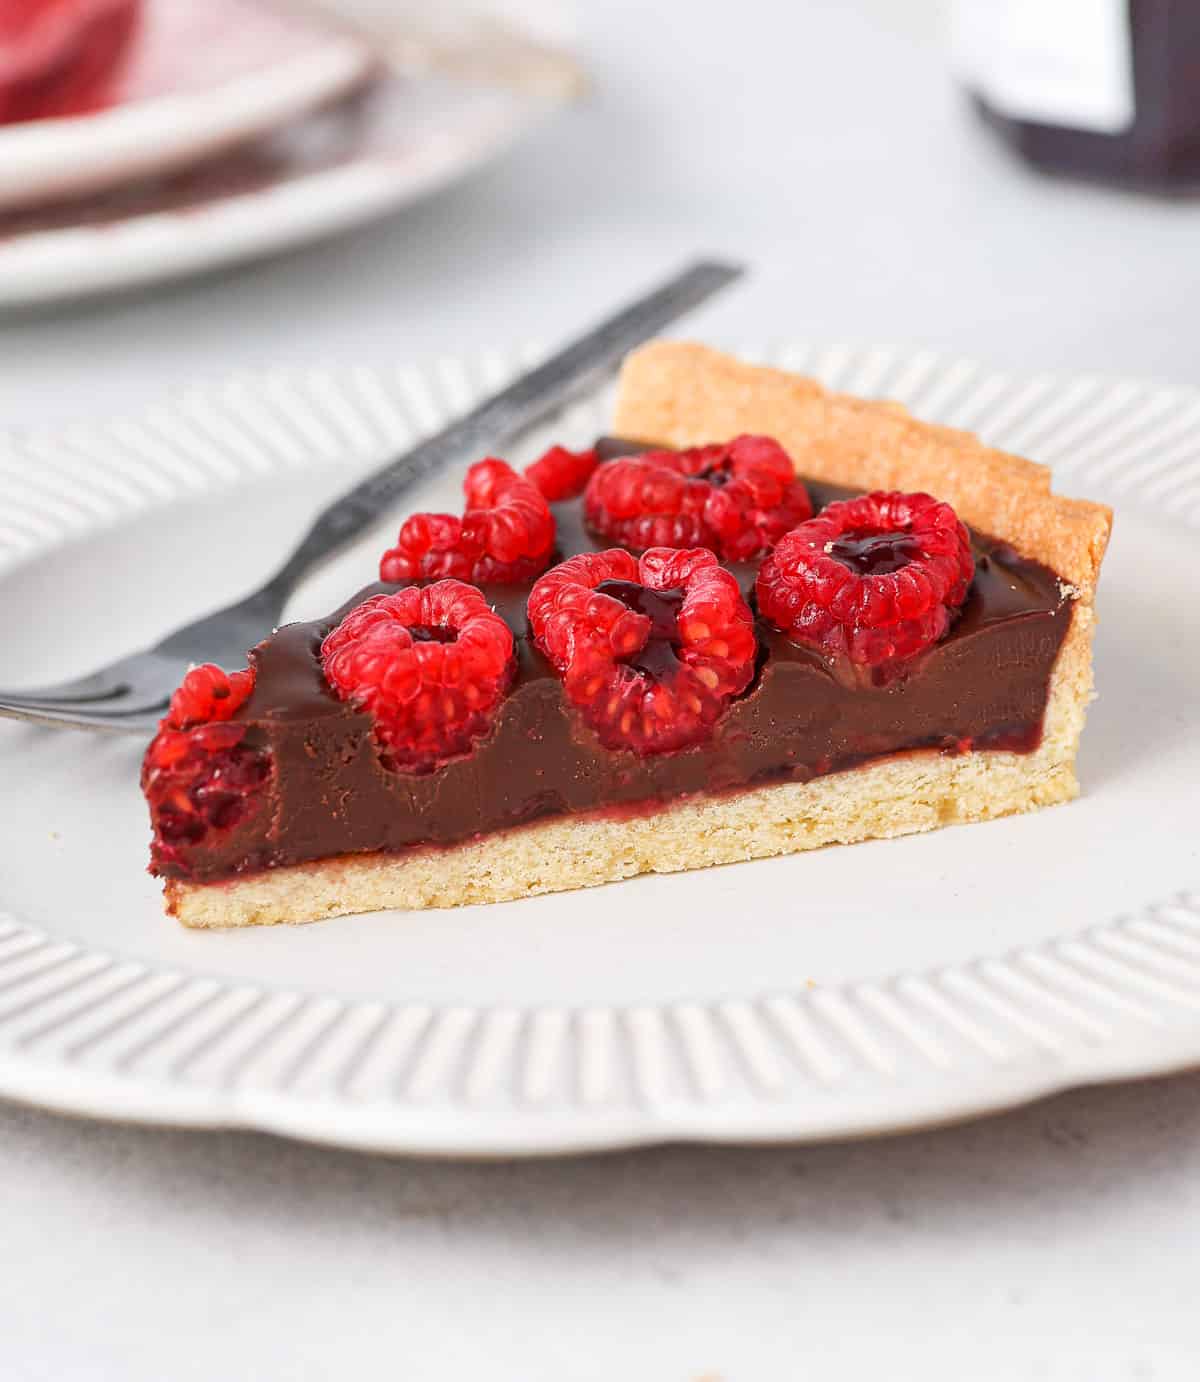 One slice of tart on a small white plate.